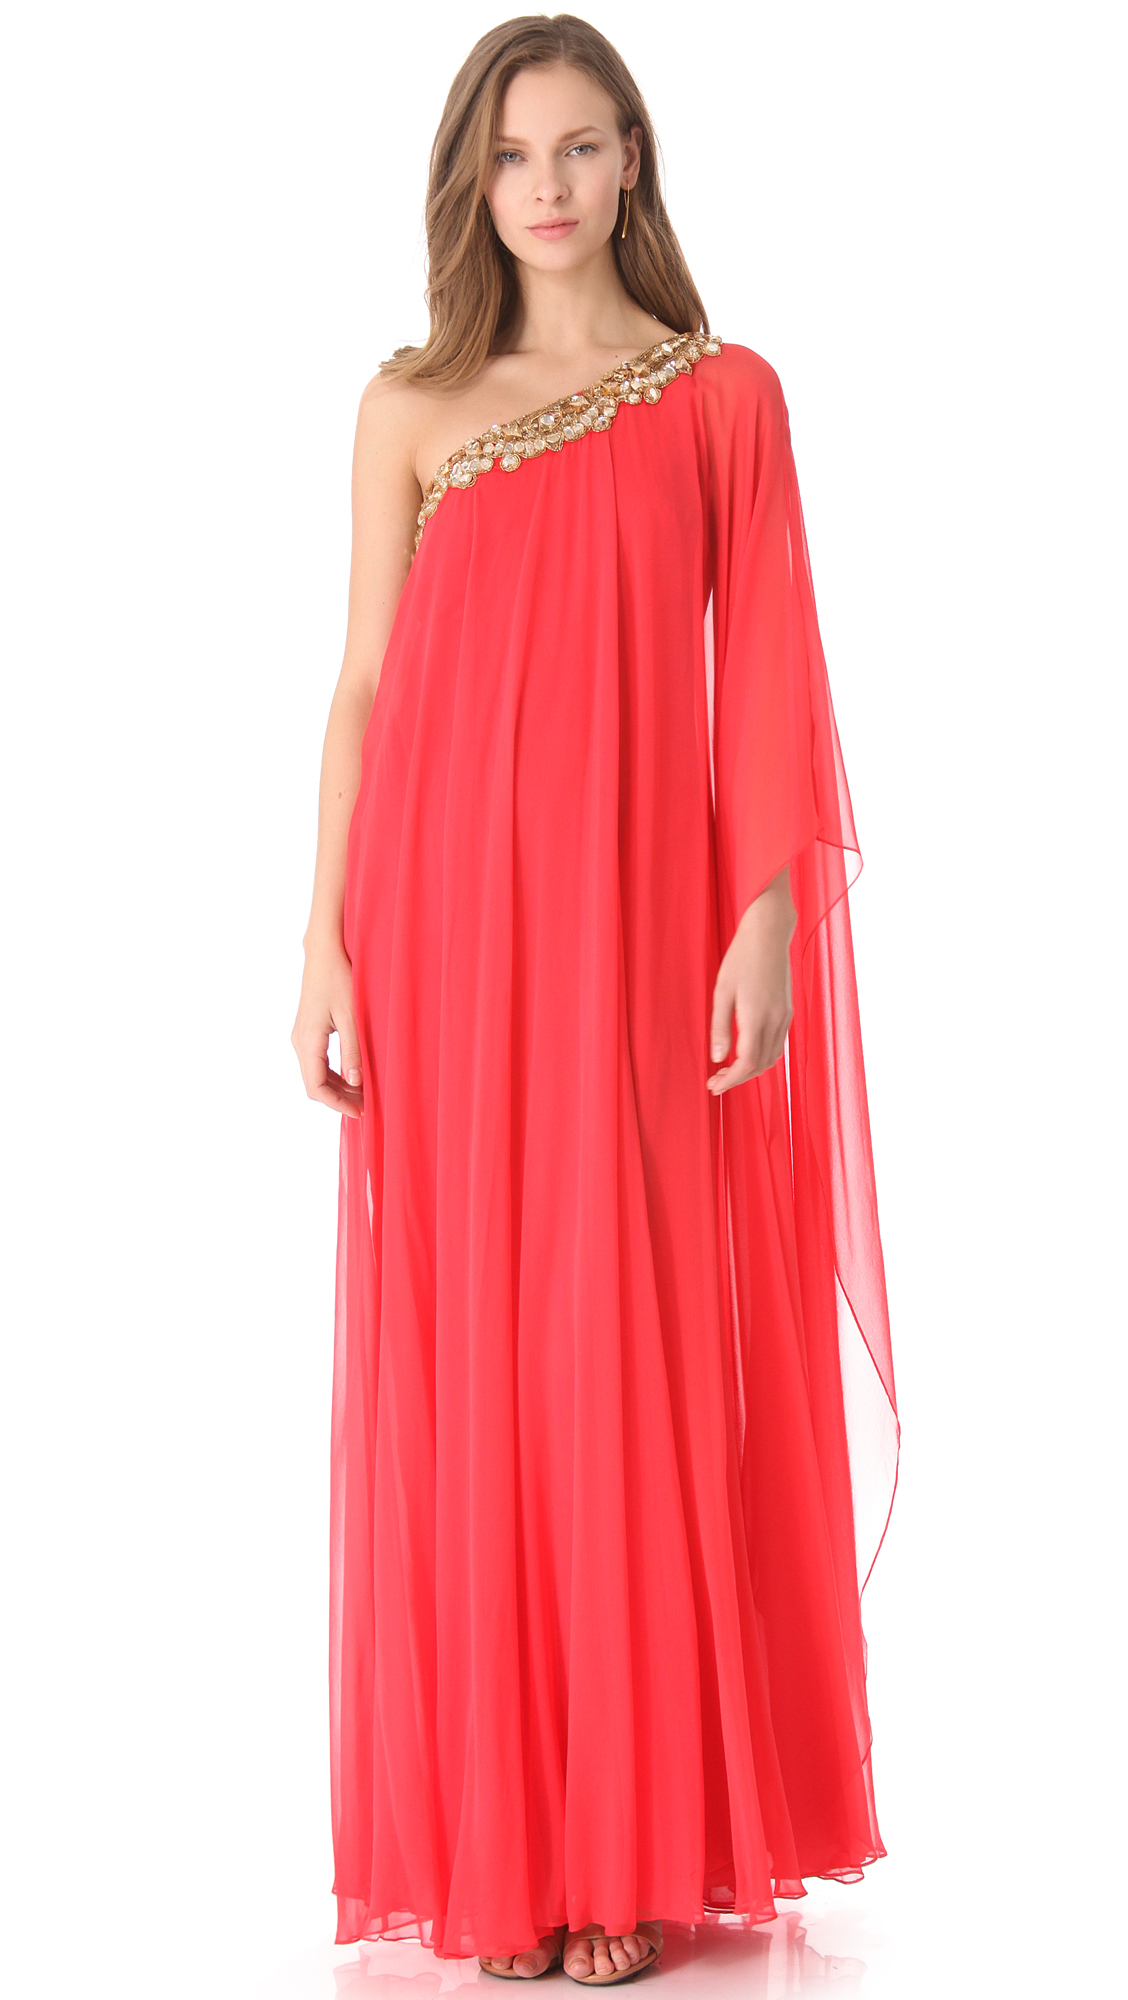 Lyst - Notte By Marchesa One Shoulder Caftan Gown in Red